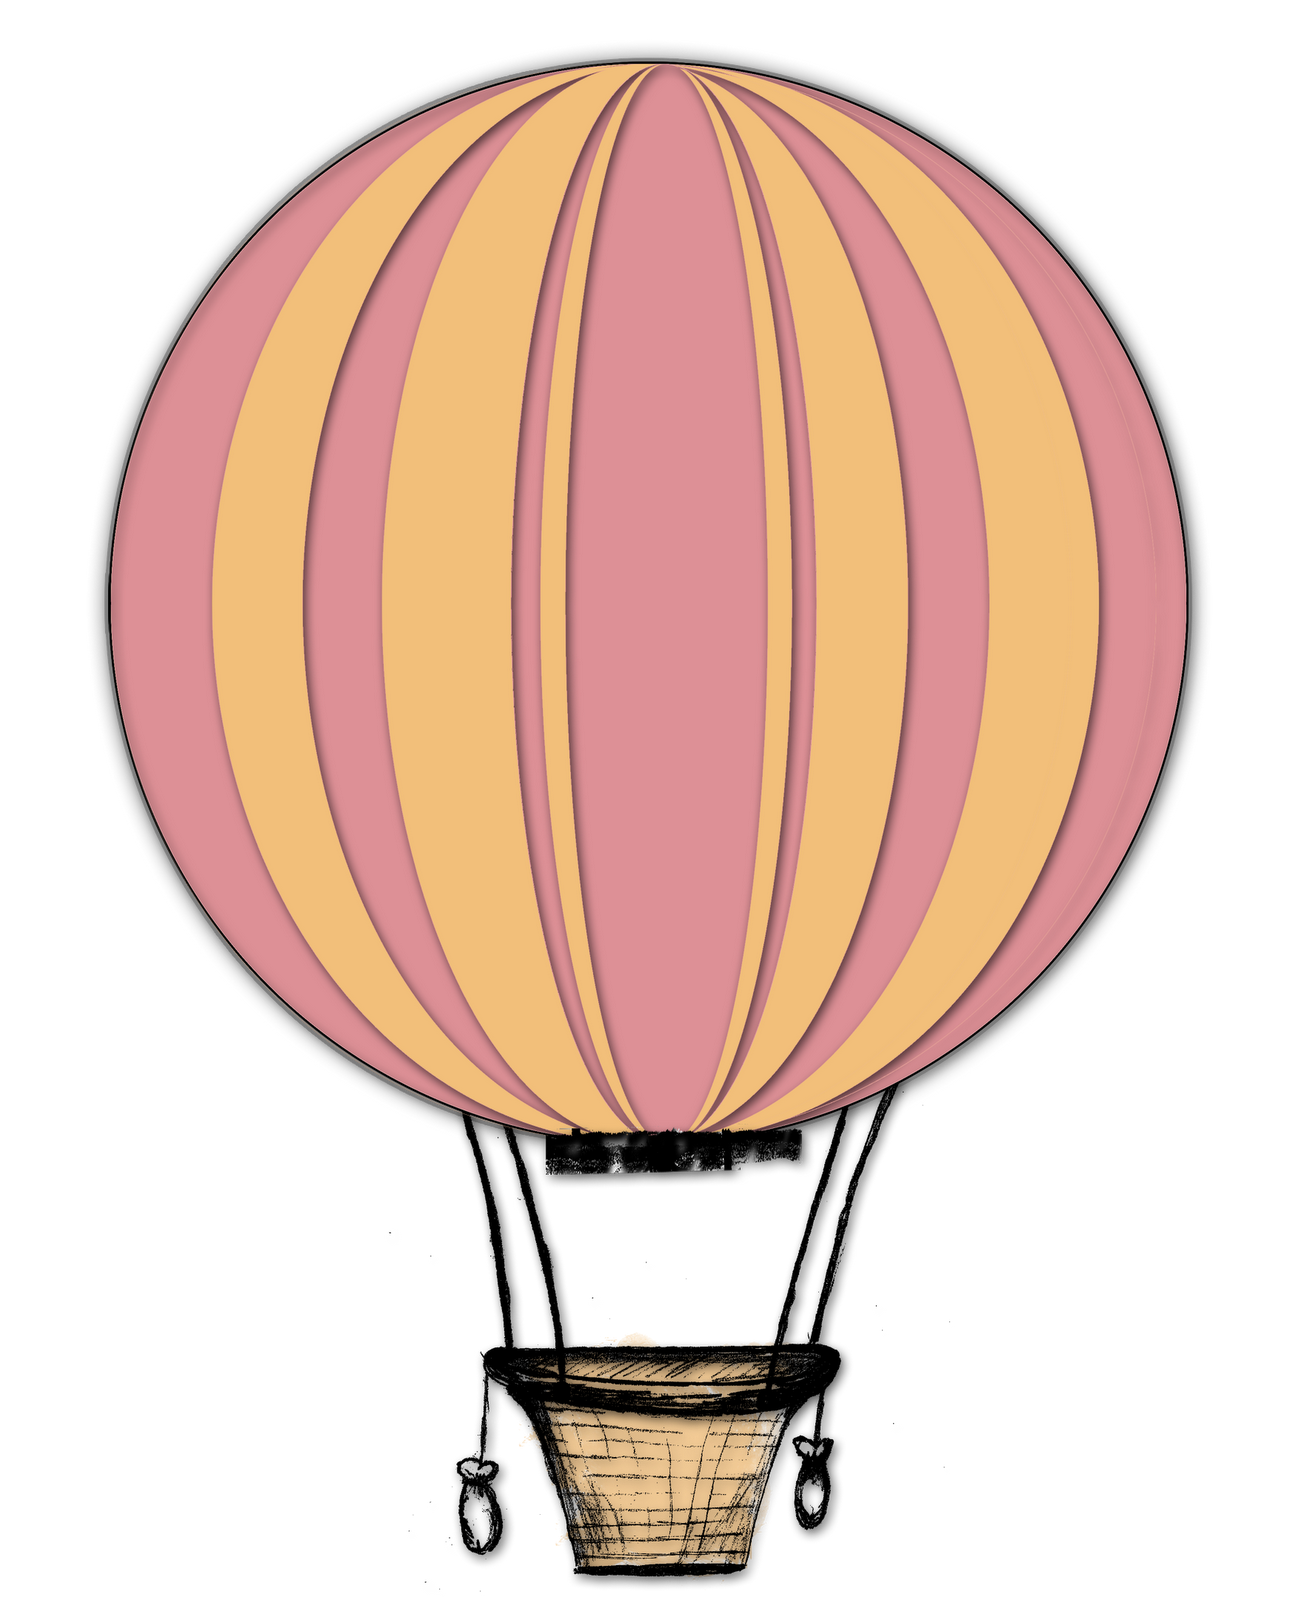 Hot Air Balloon Basket | Free download on ClipArtMag